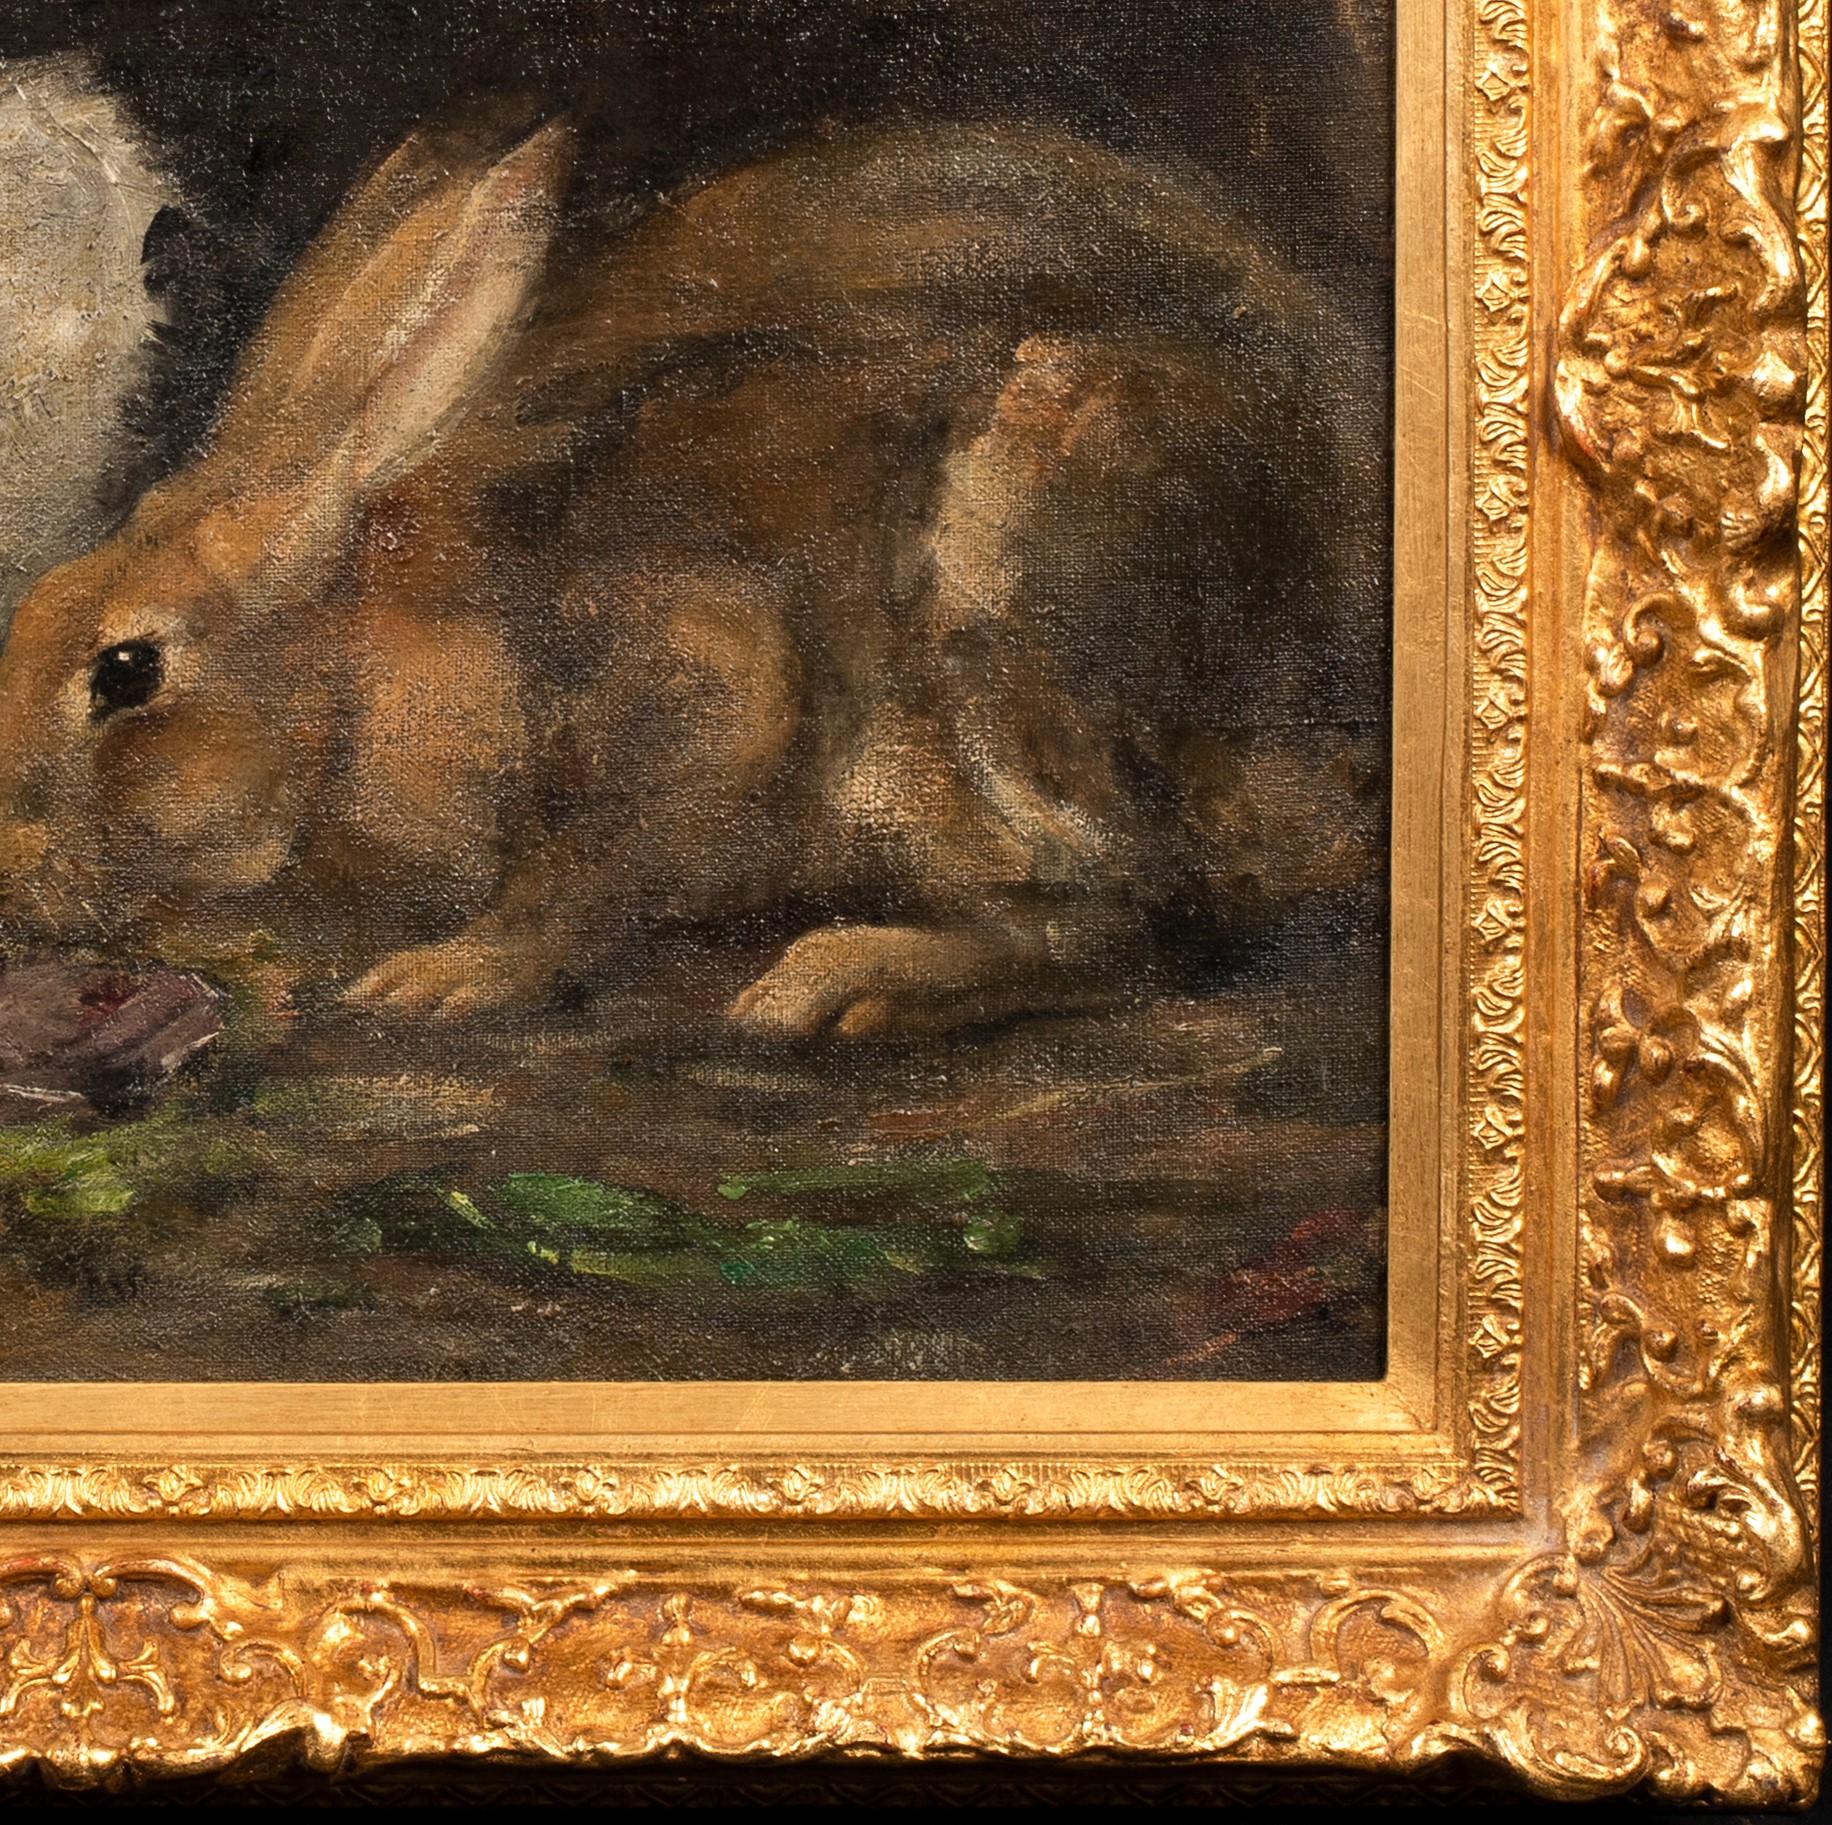 Study Of Rabbits Eating, early 20th century   English School 7